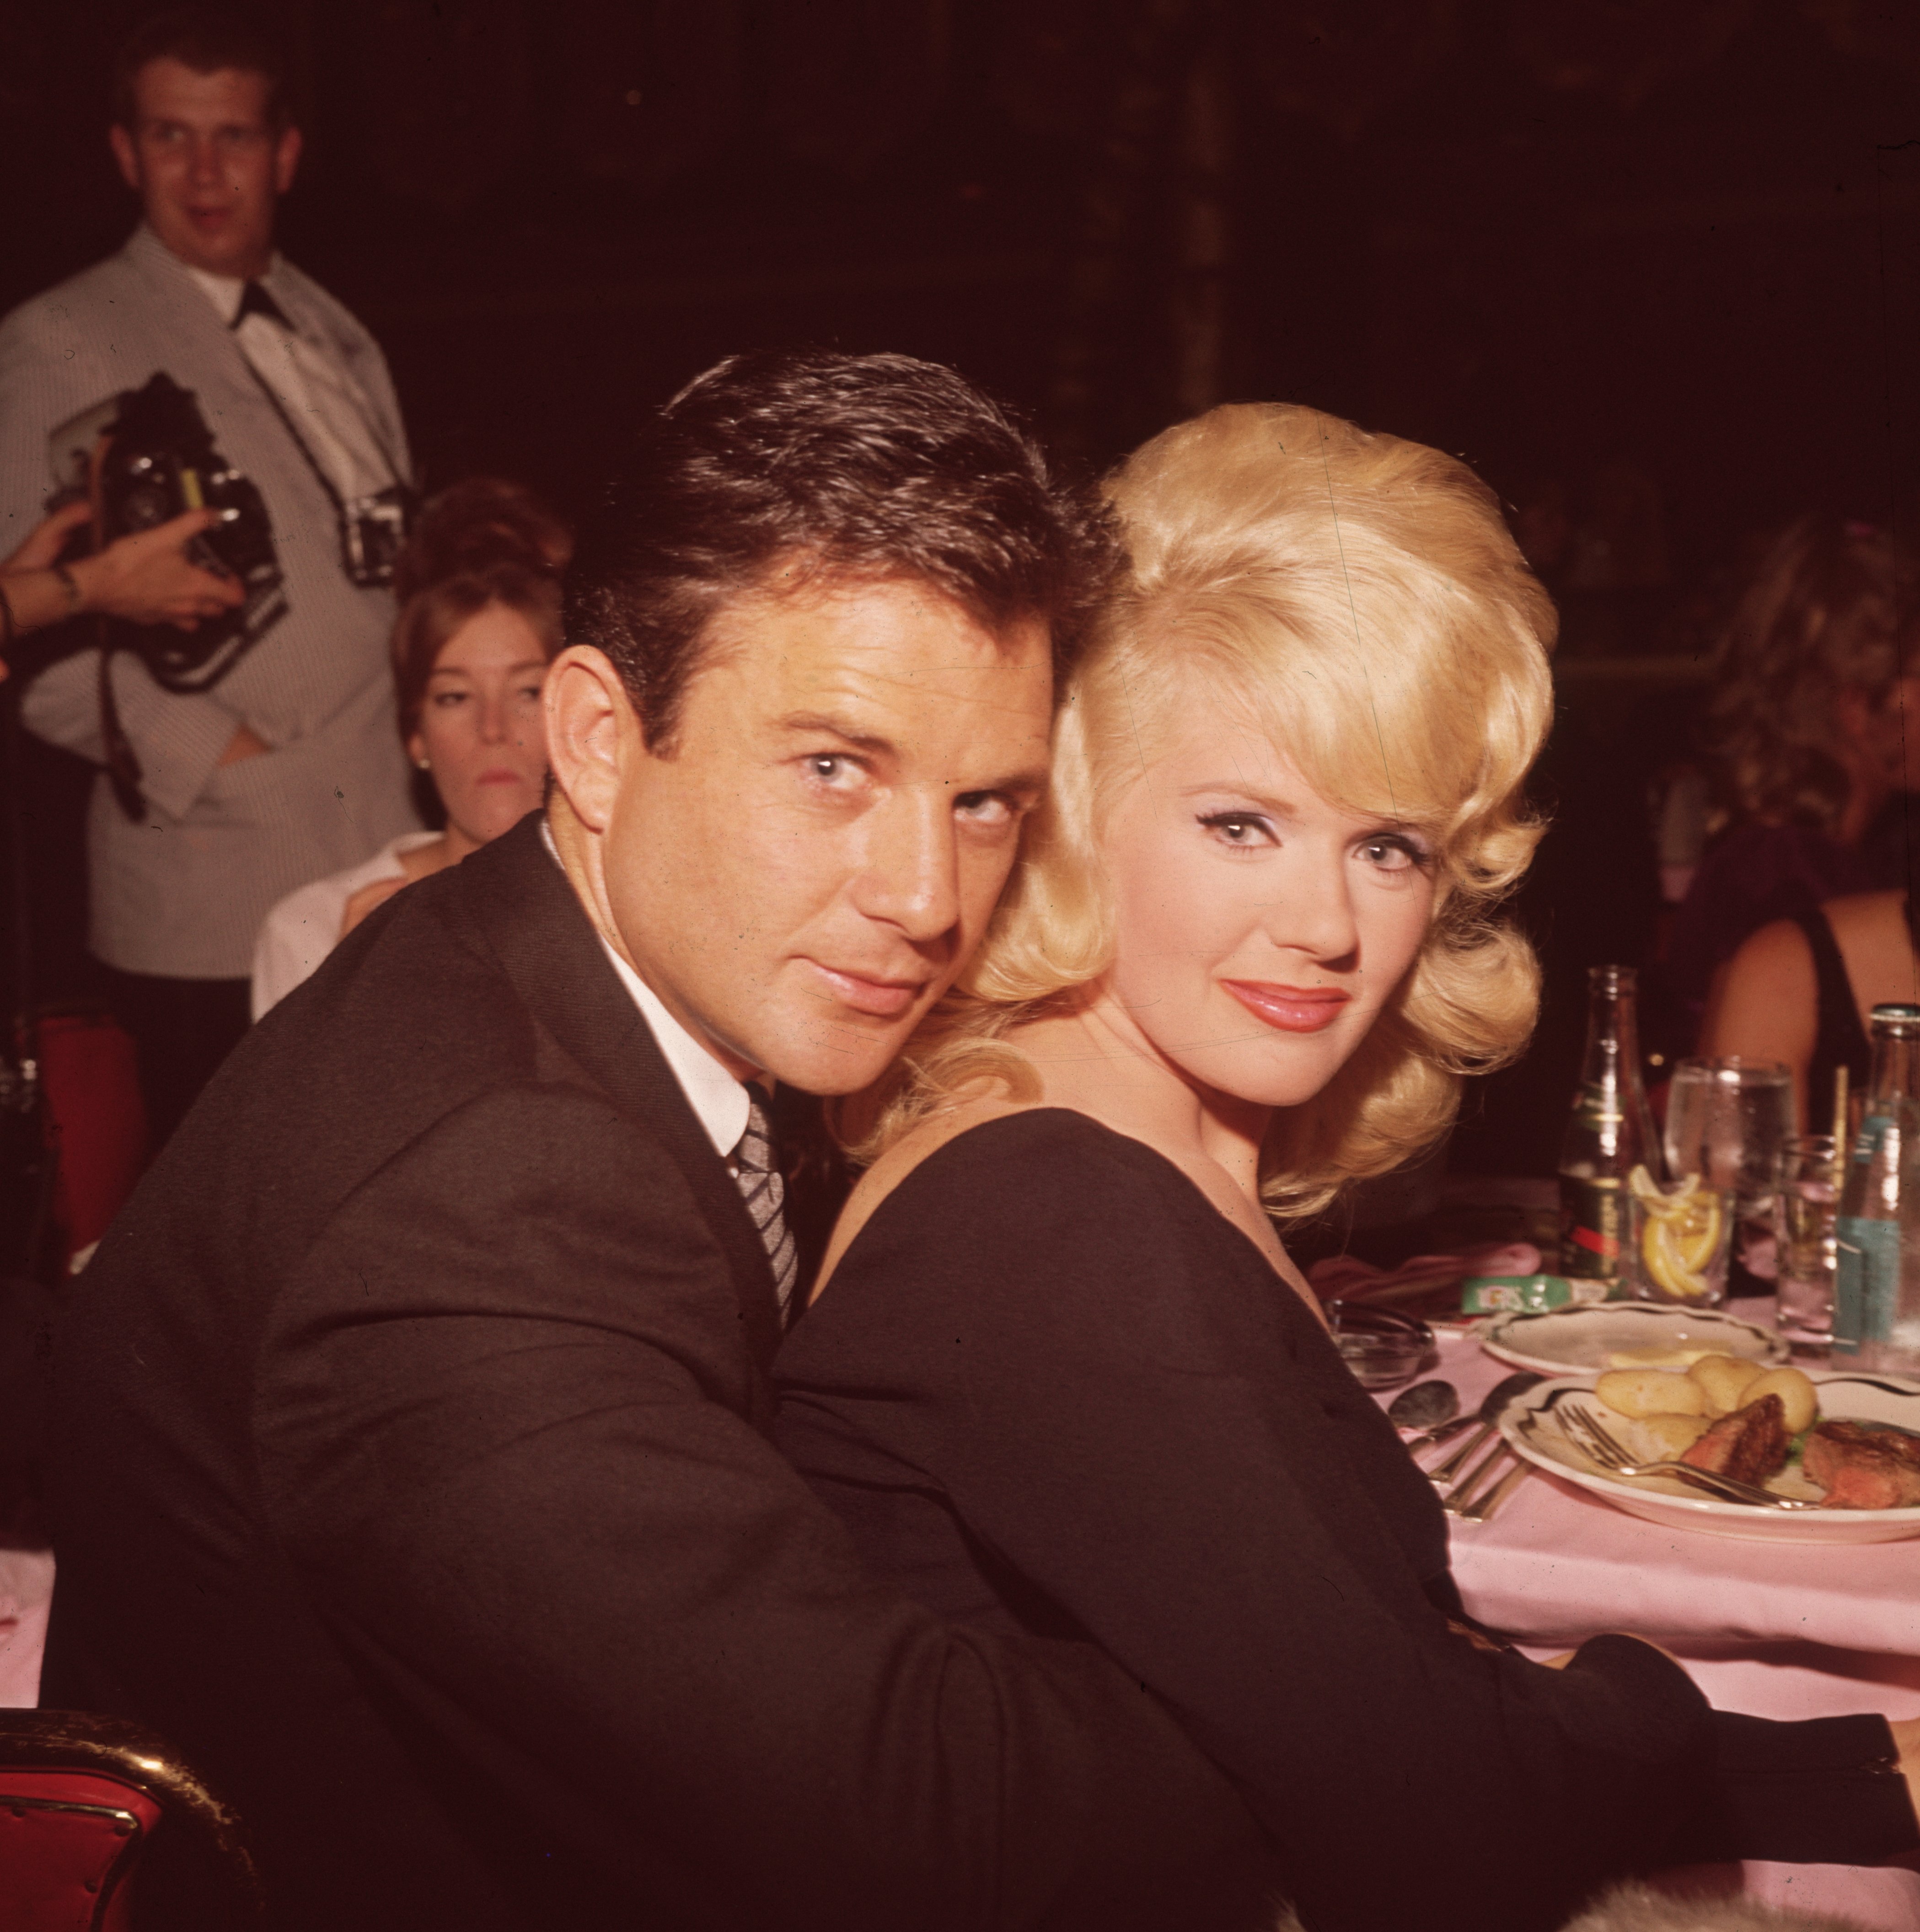 James Stacy and Connie Stevens in 1964. | Photo: Getty Images